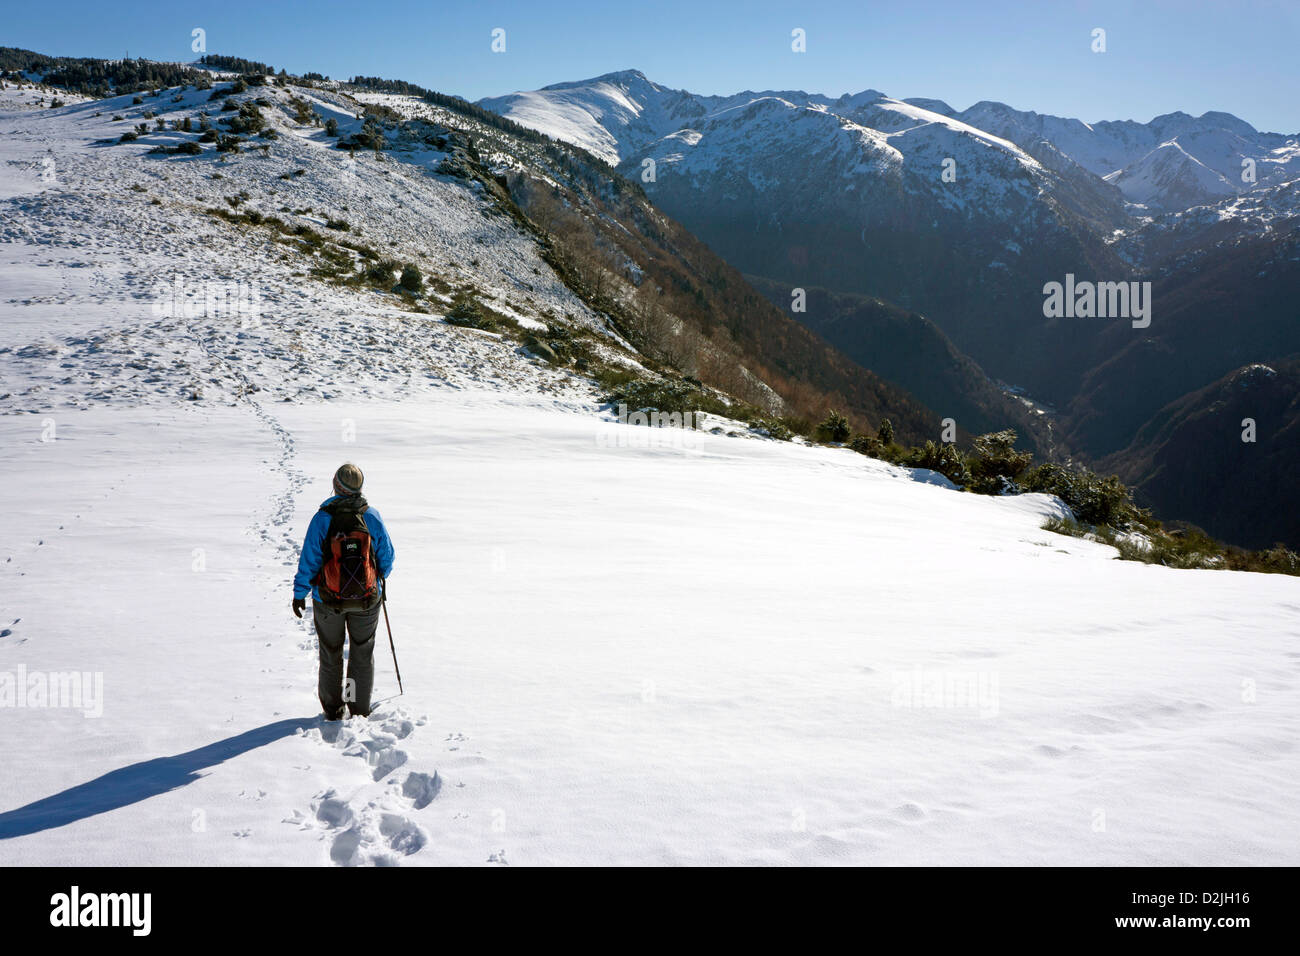 Walker in blue on snow slope, French Pyrenees Stock Photo